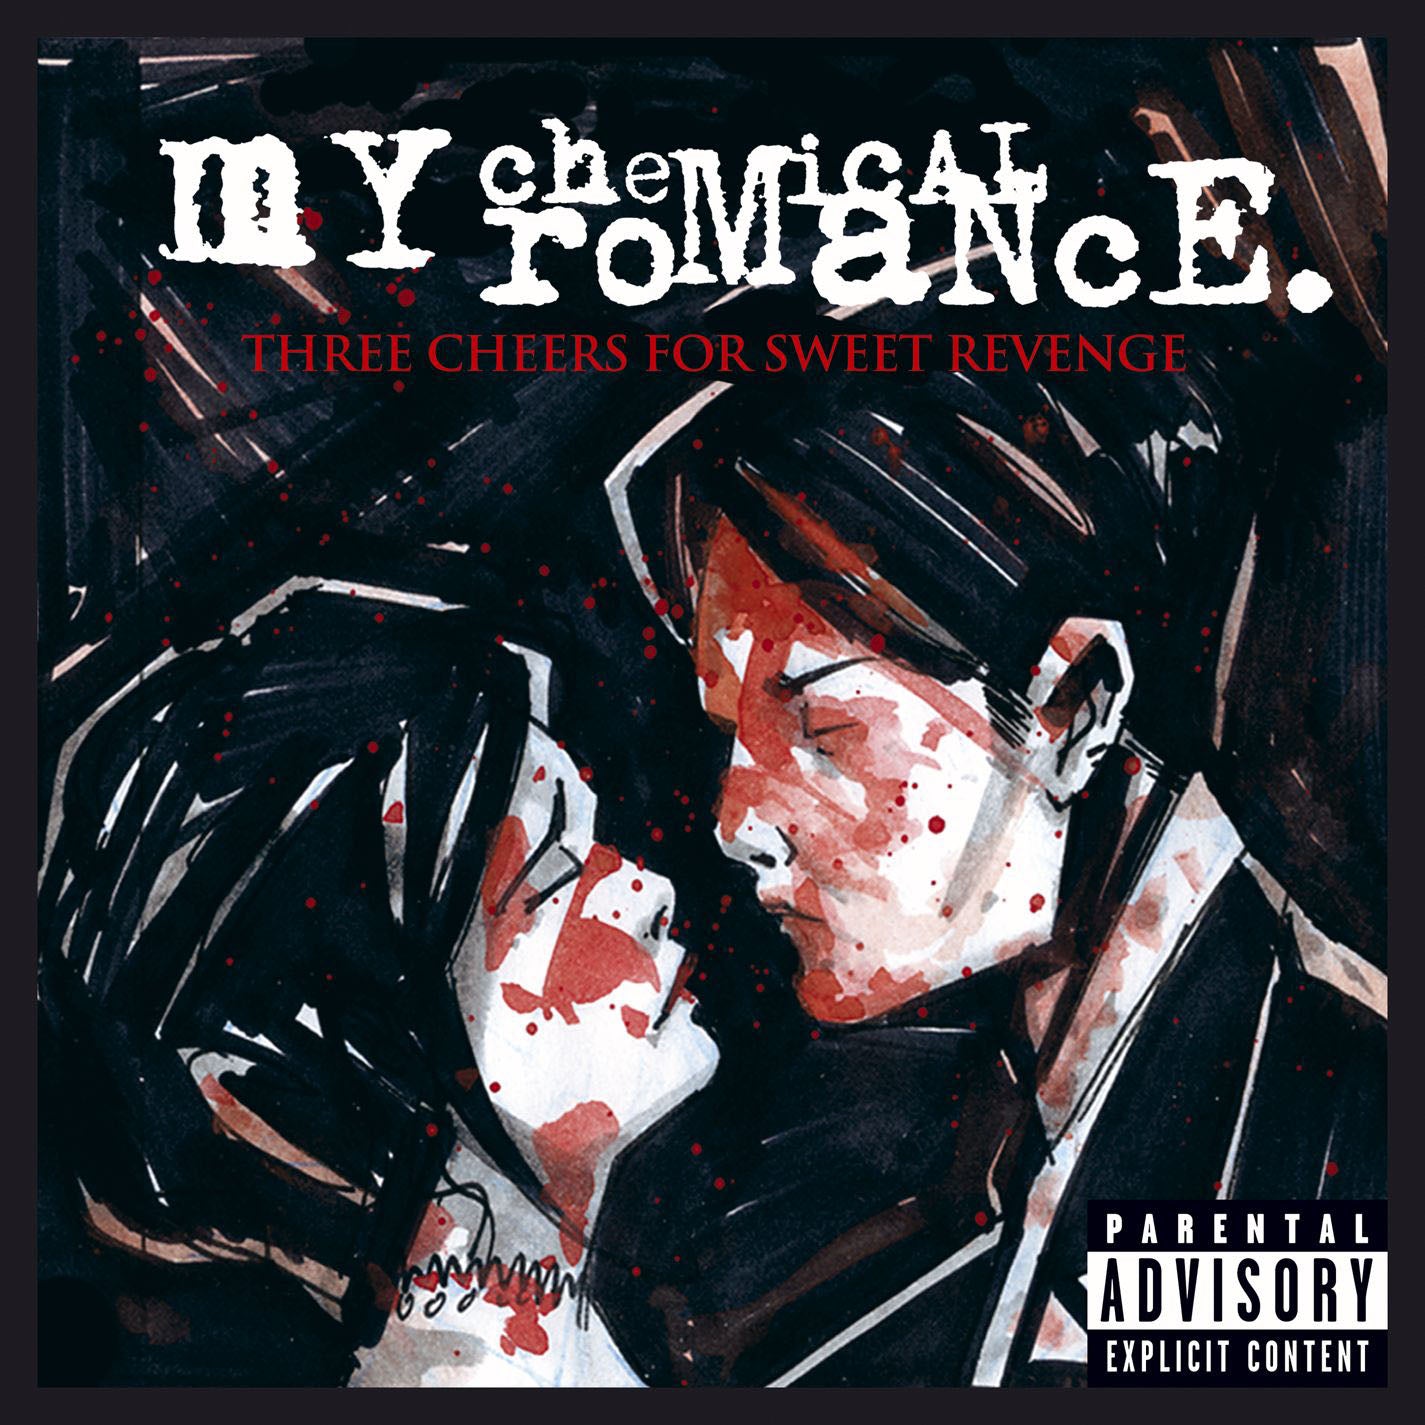 My Chemical Romance - Three Cheers For Sweet Revenge [Picture Disc]